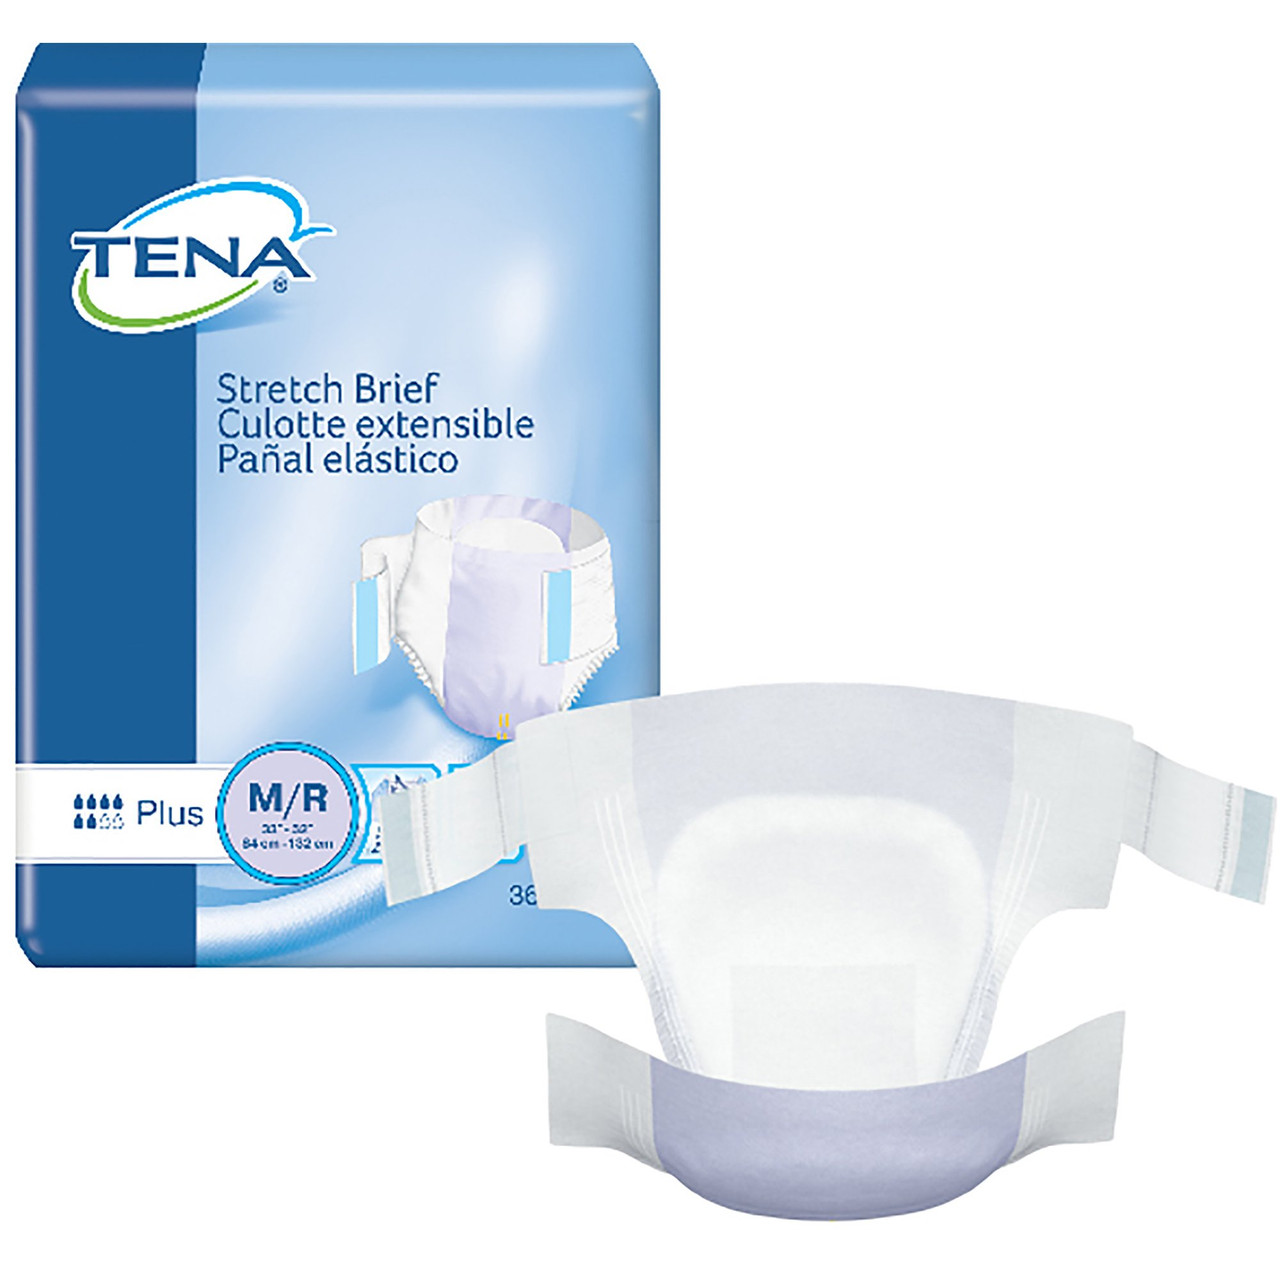 TENA Stretch Incontinence Briefs, Plus Absorbency - Unisex Adult Diapers,  Disposable - Simply Medical